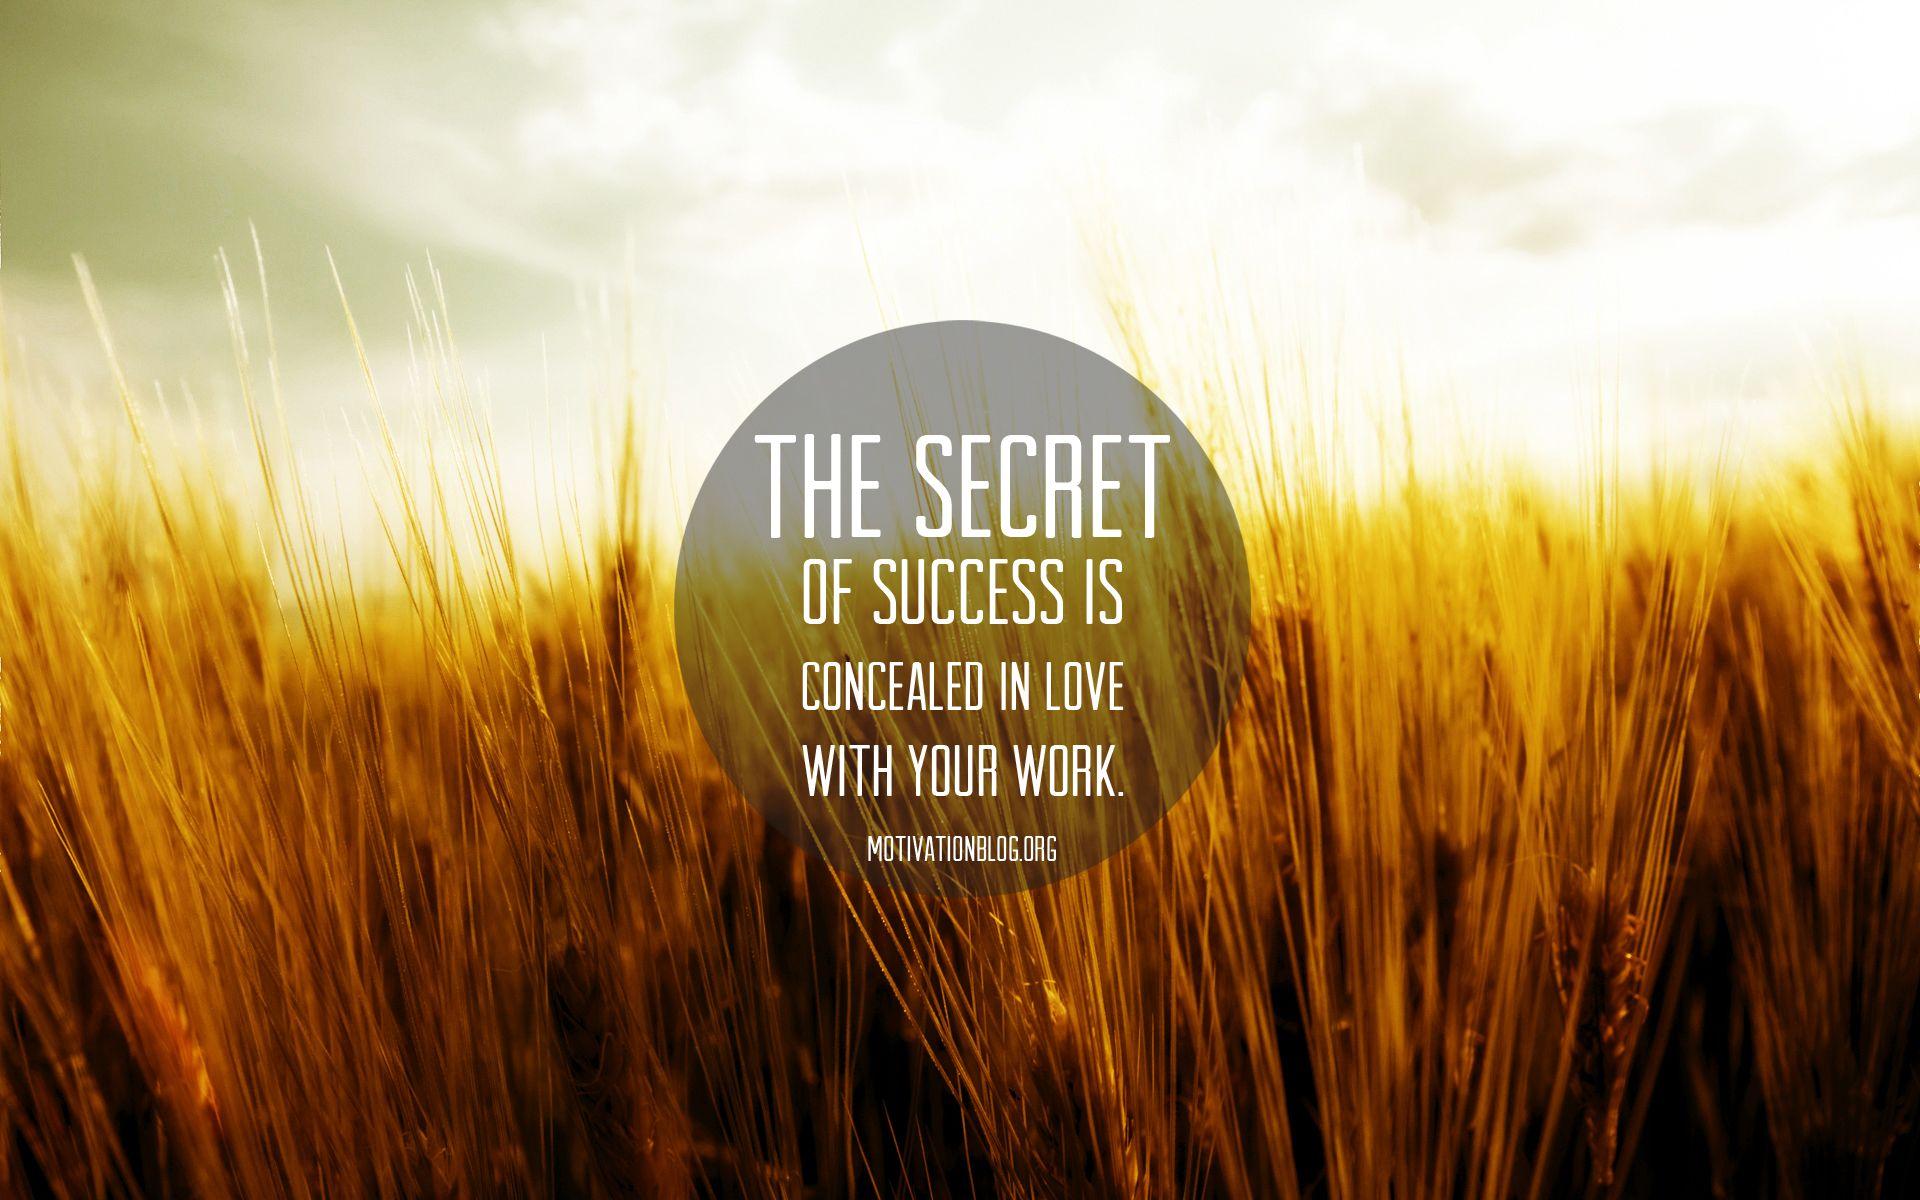 Motivational quotes and posters. The secret of success